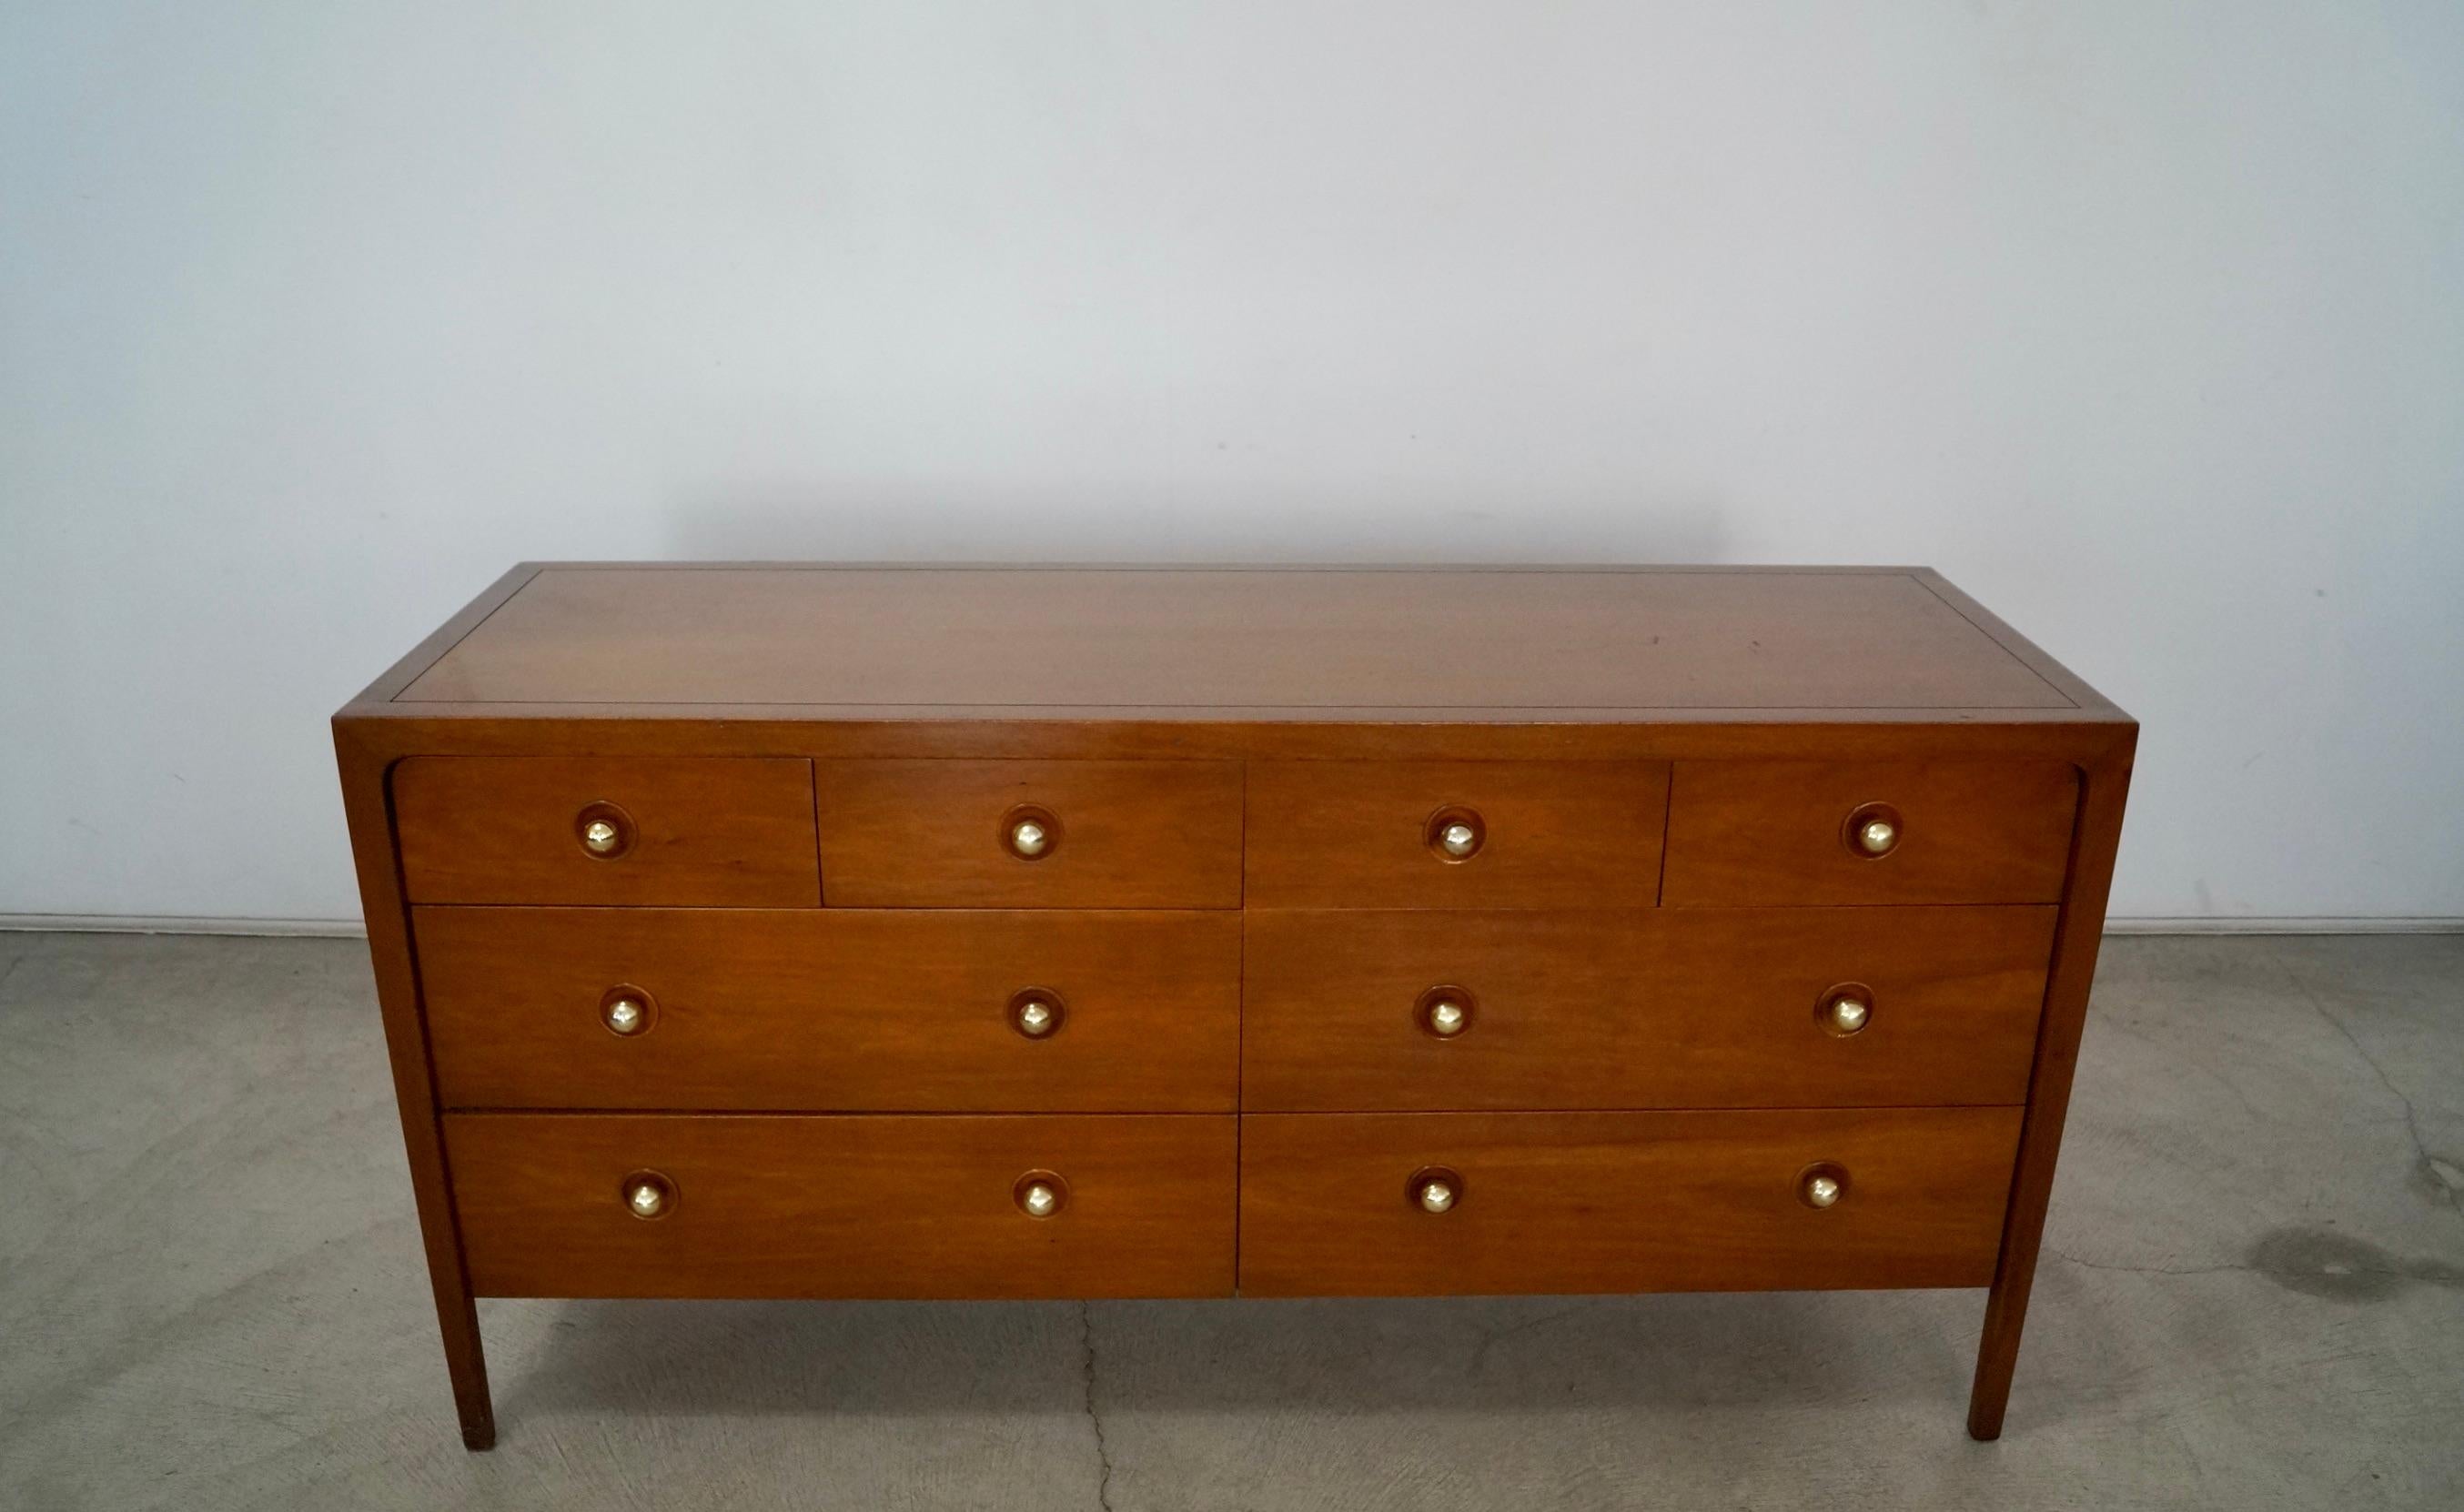 Vintage Mid-century Modern designer dresser for sale. Designed by John Van Koert for Drexel in 1956, and is part of the Counterpoint series by Koert. Very beautiful and rare dresser with a lot of storage. It has eight drawers, and has the label on a